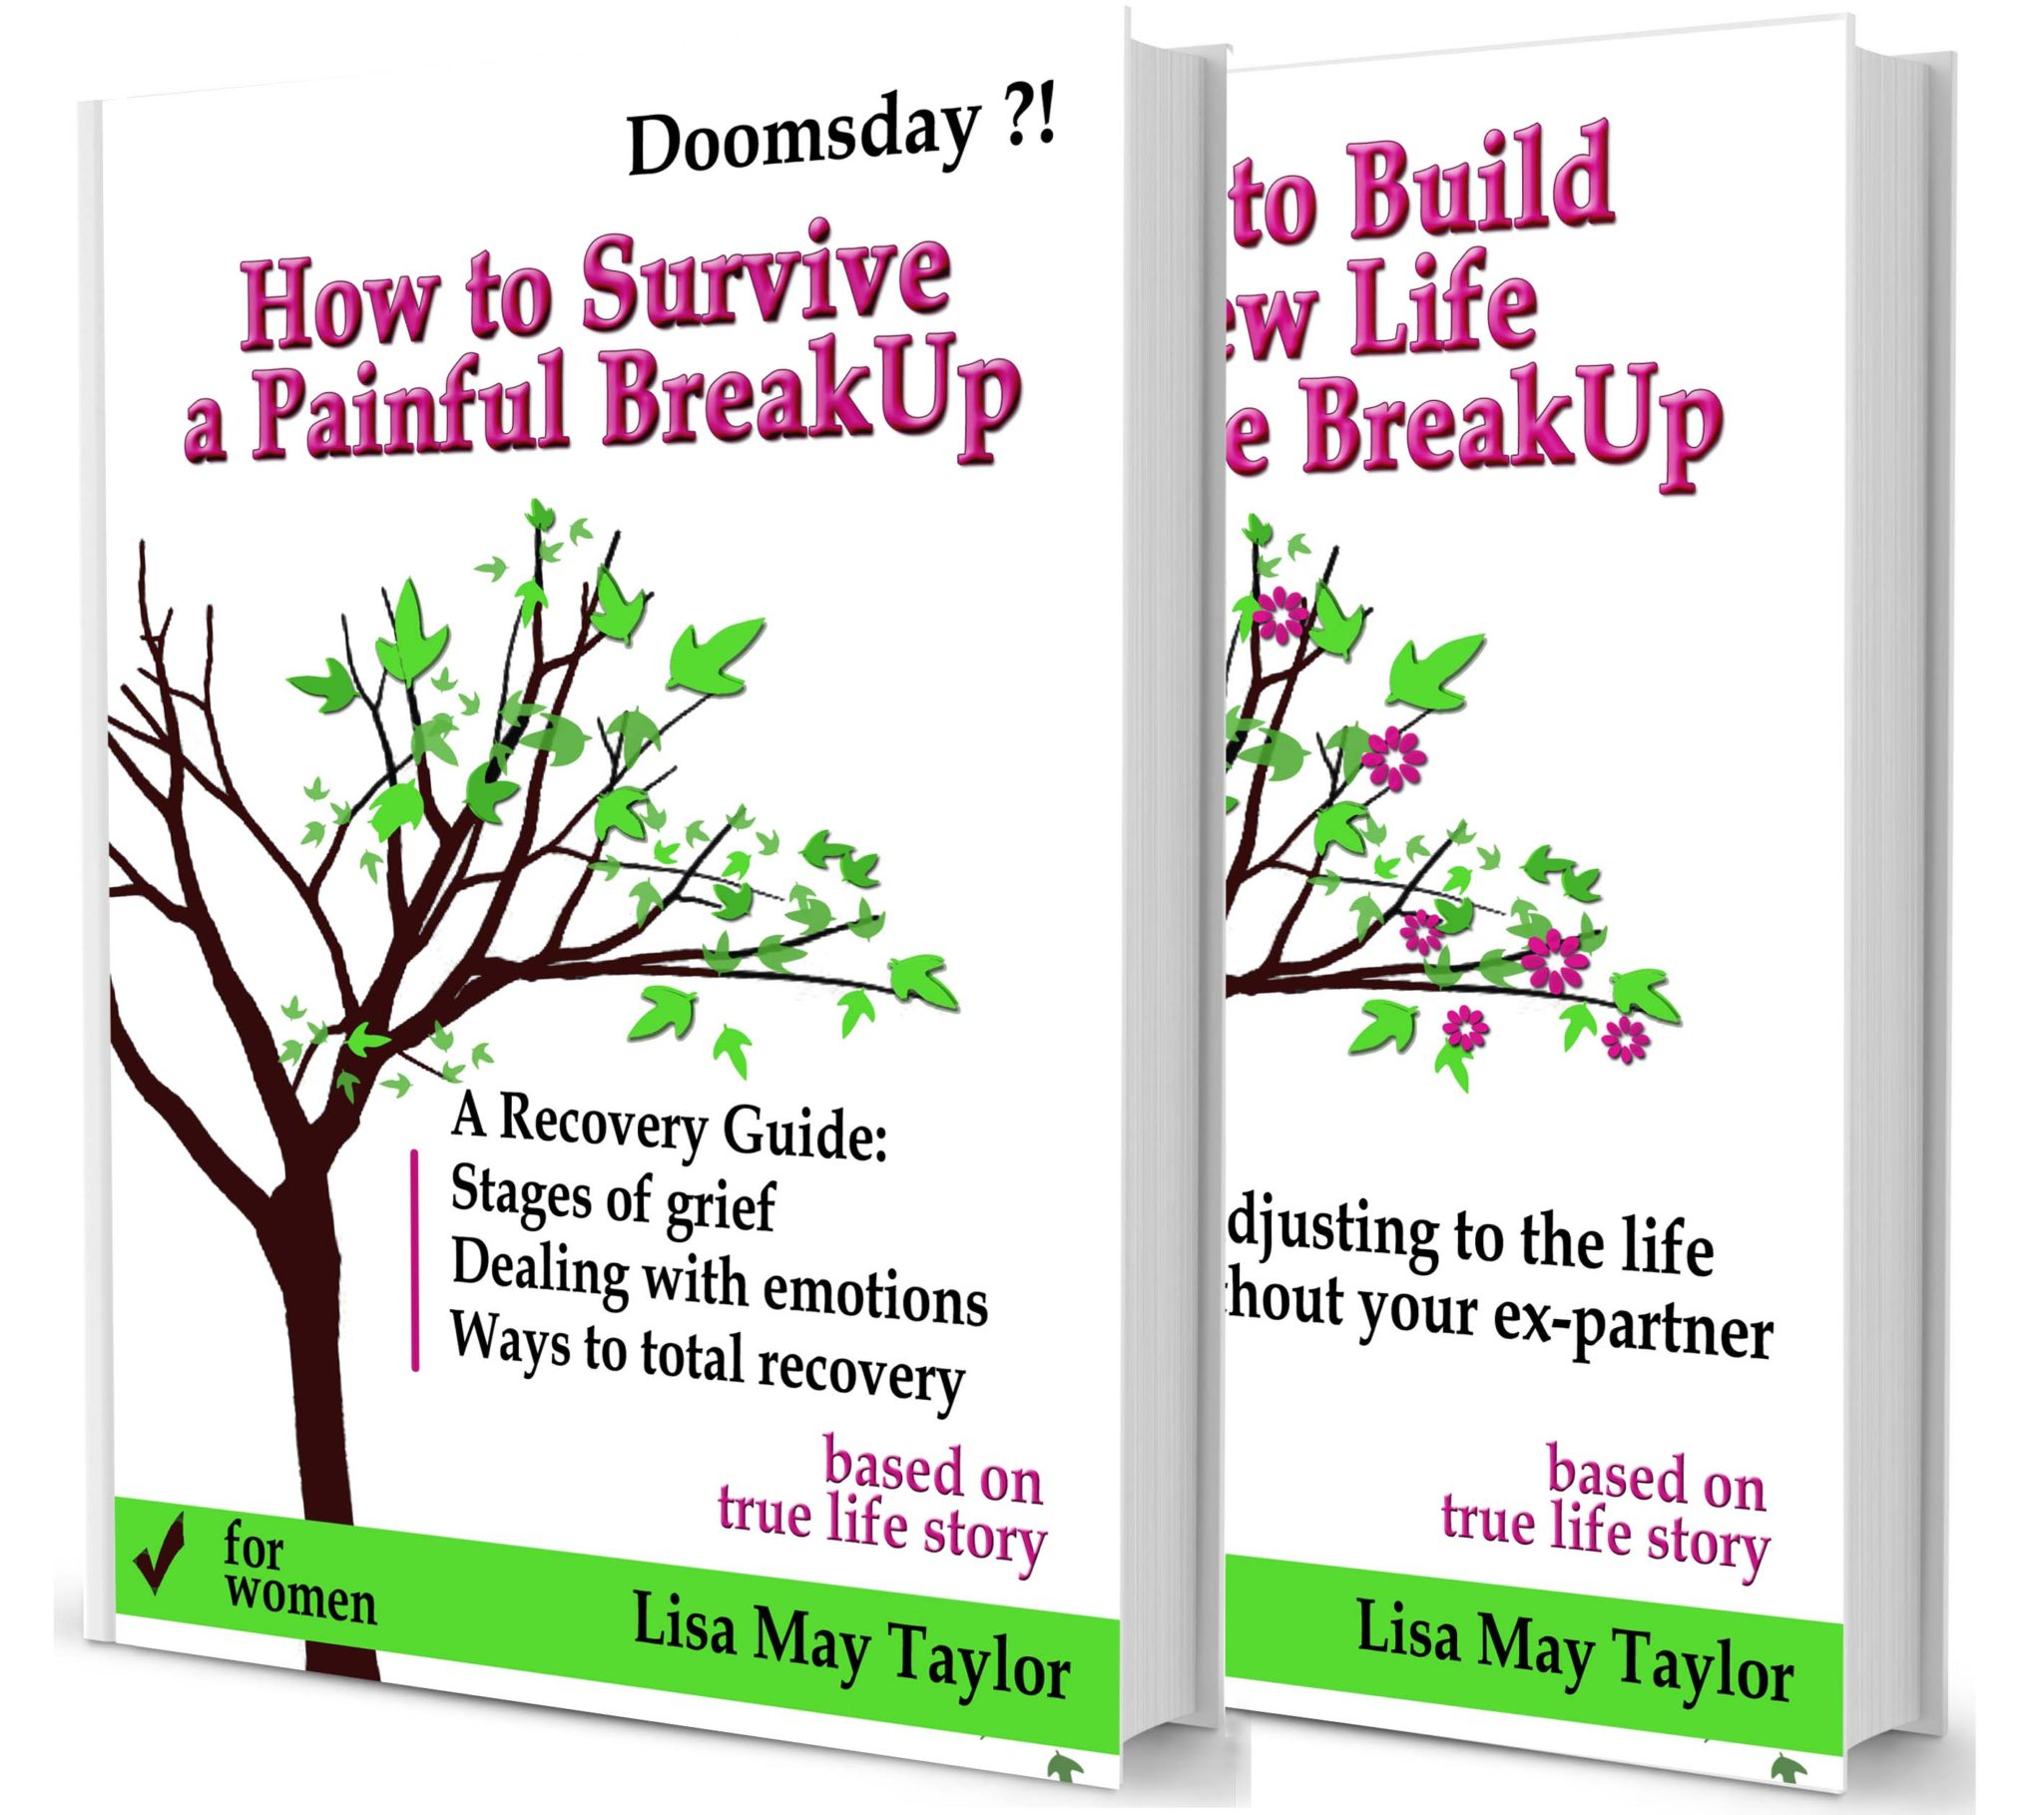 FREE: A Full Recovery Guide for Women 2 in 1 Box Set: How to Survive a Painful Breakup and How to Build a New Life after the Breakup by Lisa May Taylor